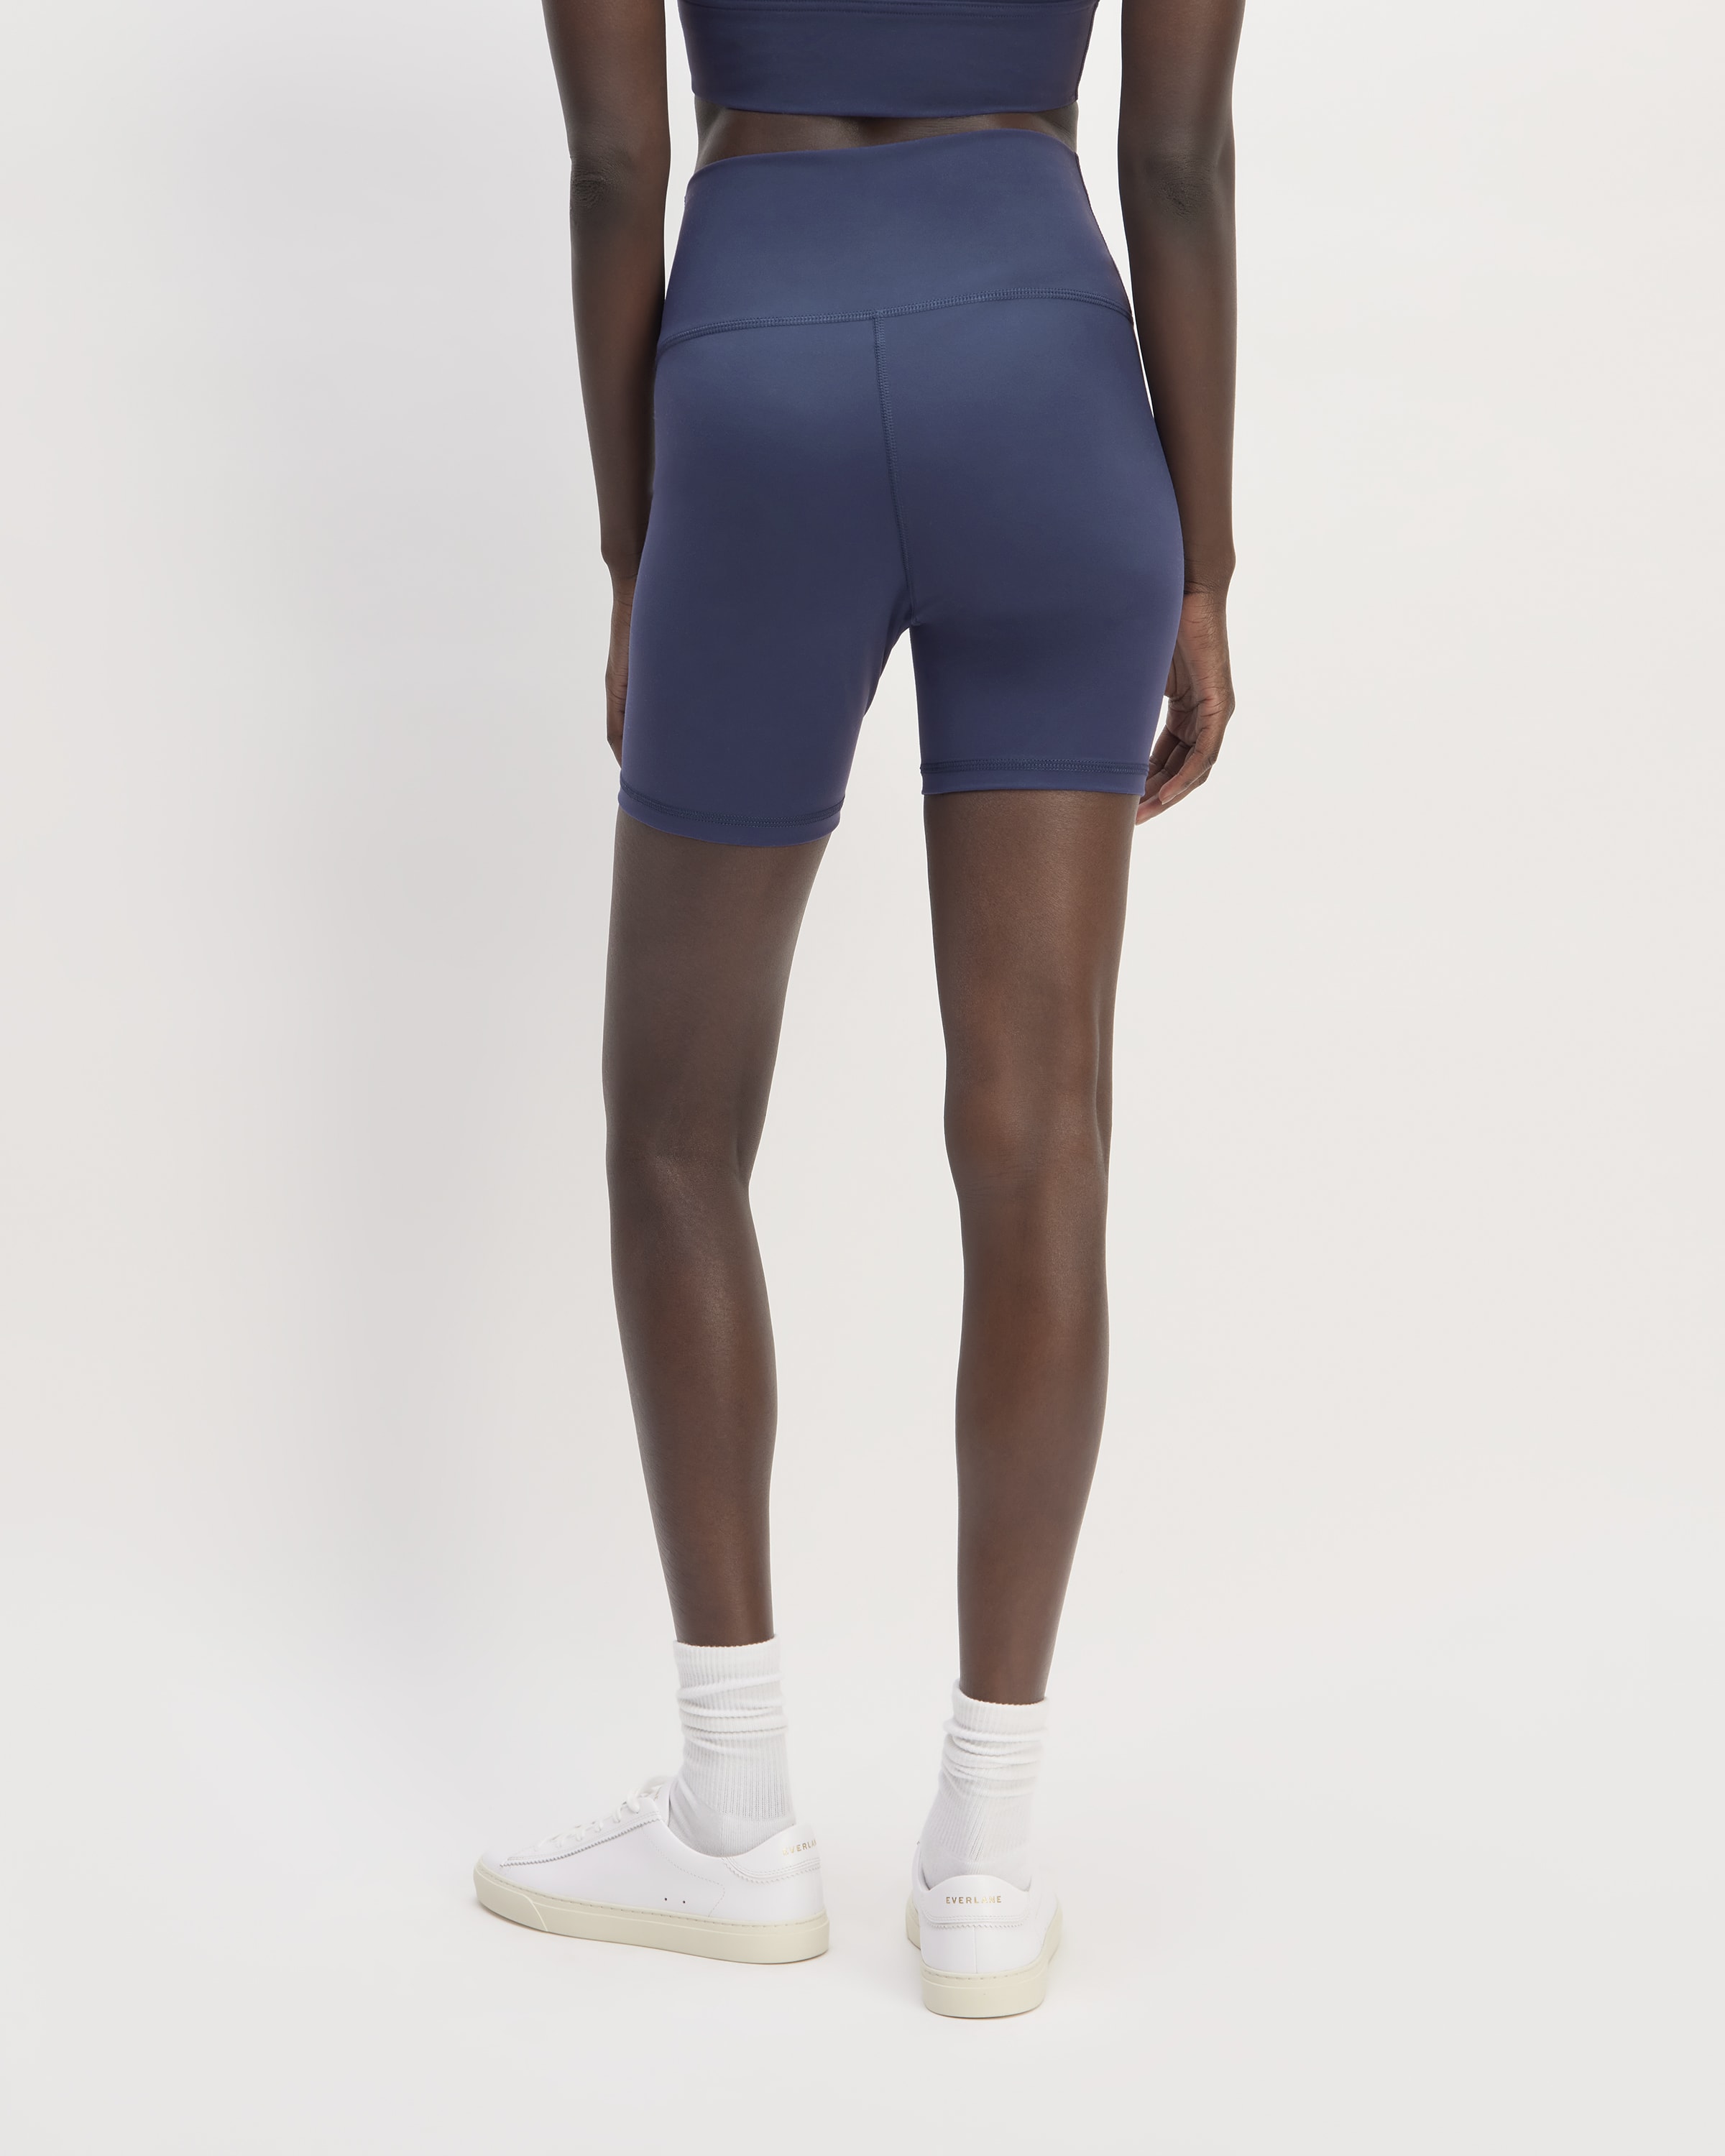 Everlane Perform Bike Short Review - Jeans and a Teacup